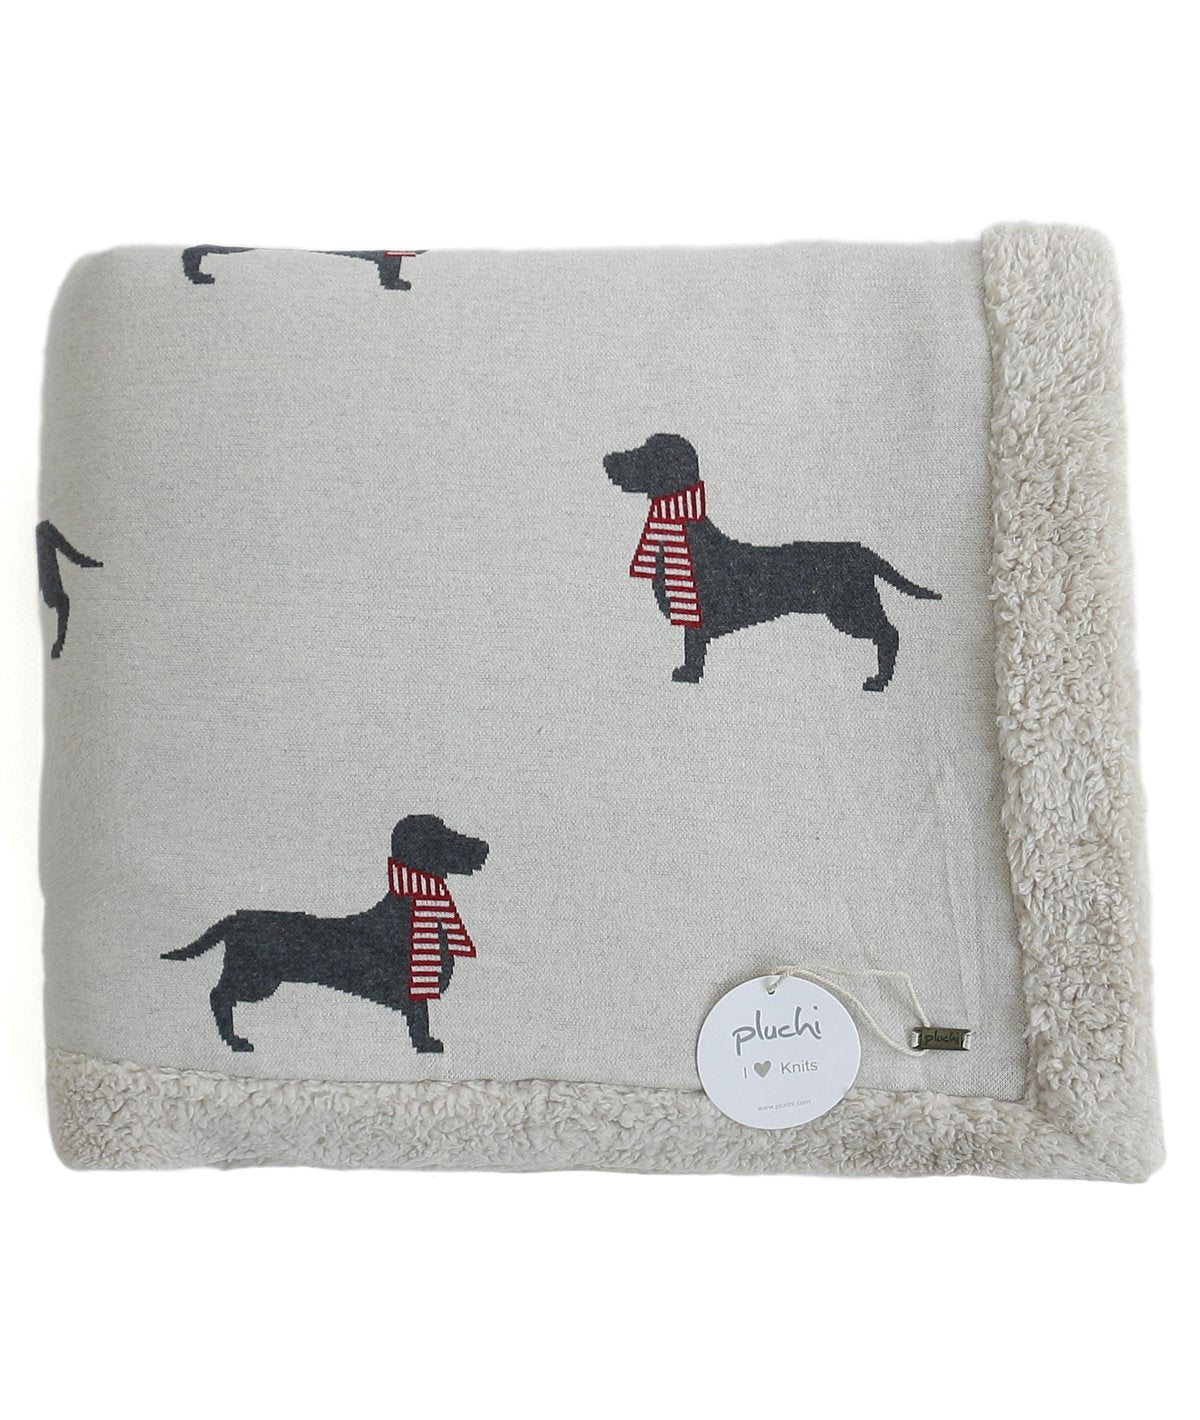 Dachshund - Pale Whisper Cotton Knitted Kids Single Bed Blanket with Warm Sherpa Fabric